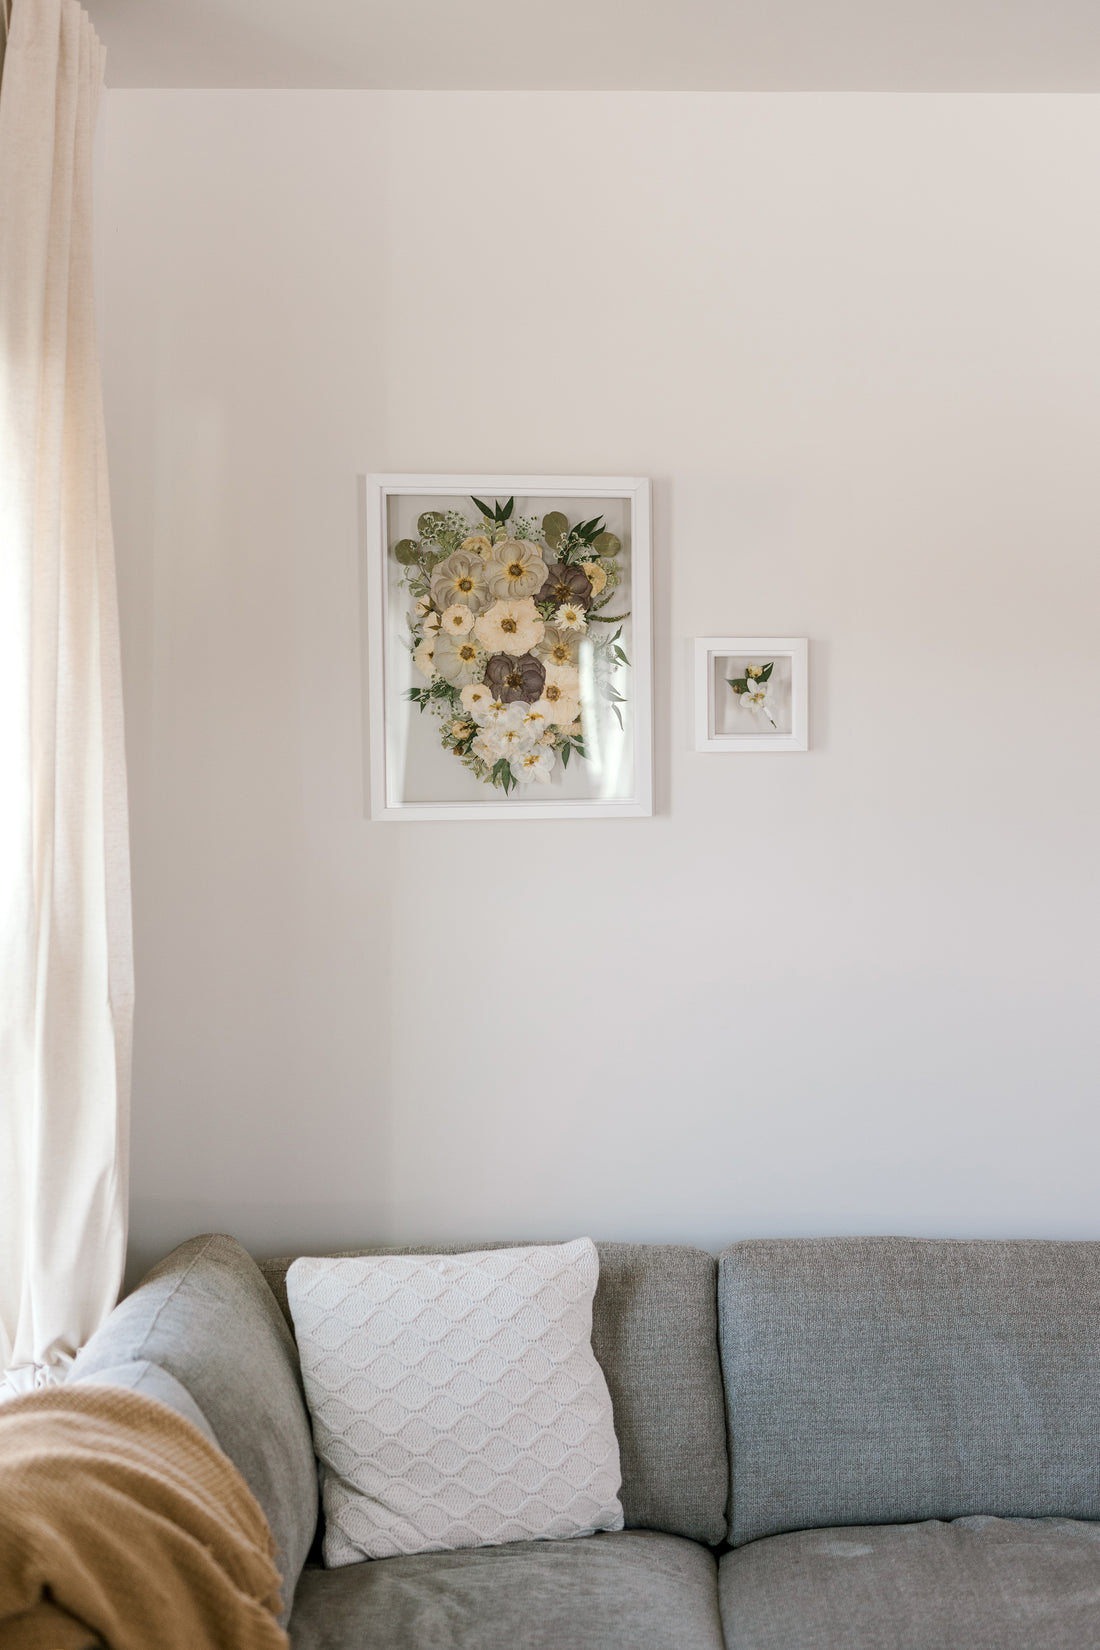 A 16x20 frame with a 6x6, mini frame makes up the Classic Bundle hung up on the wall.